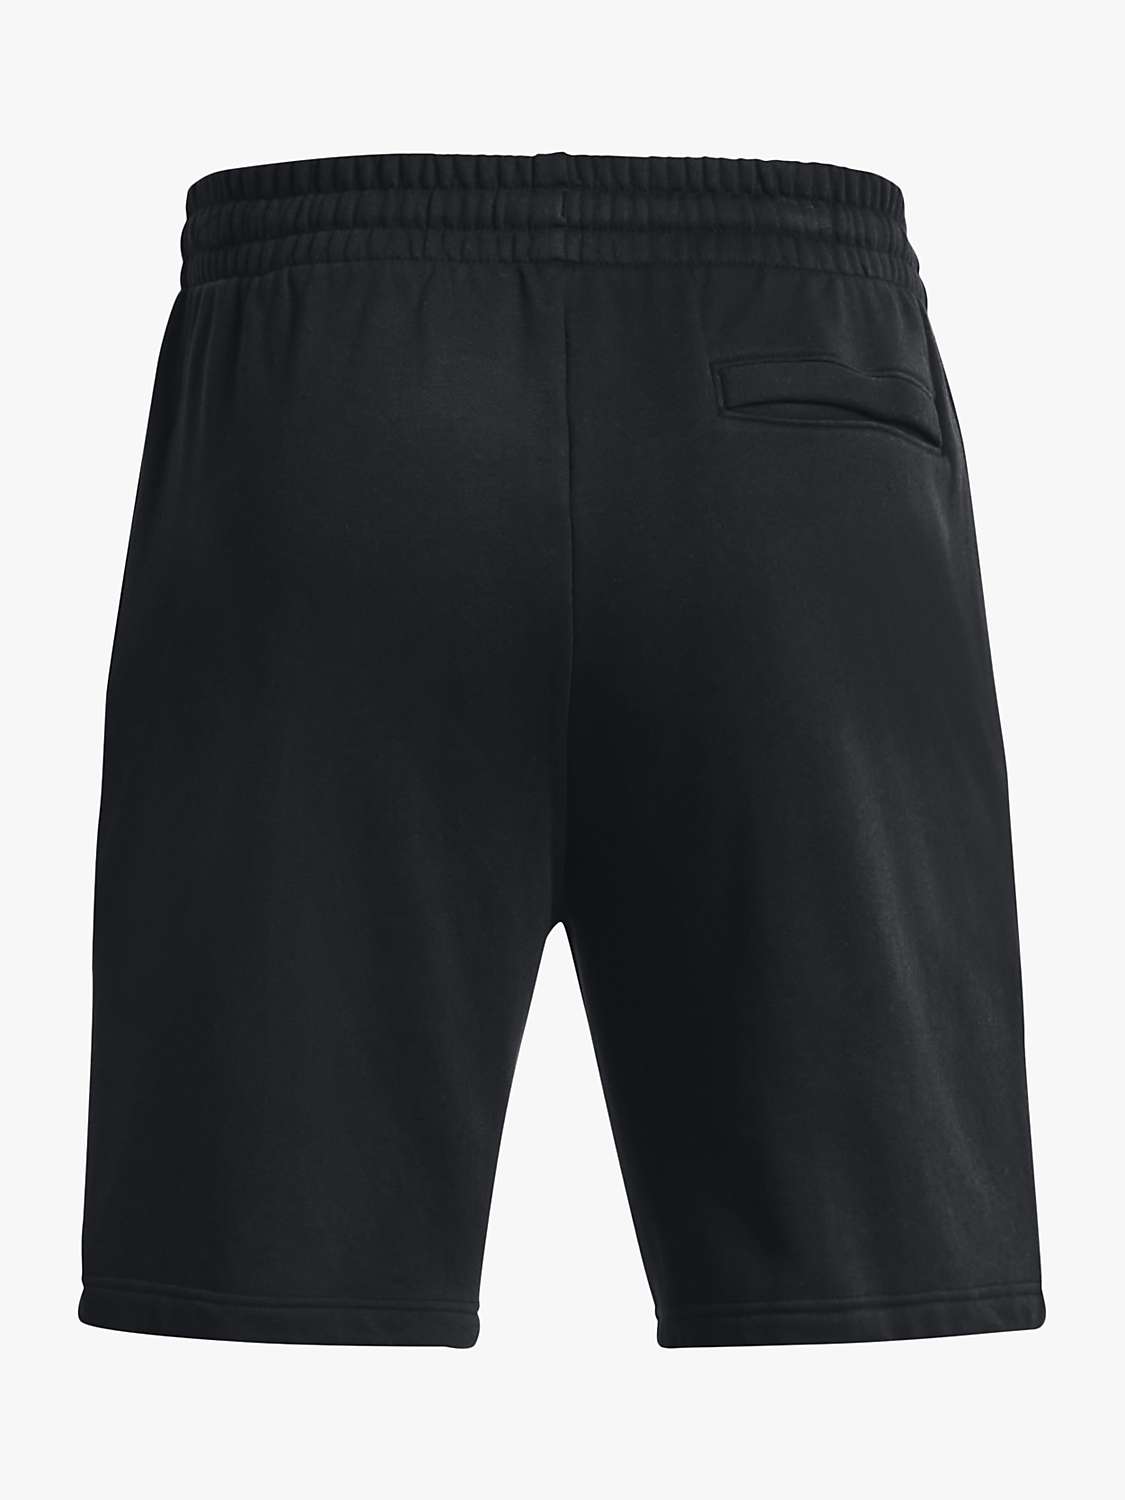 Buy Under Armour Rival Fleece Shorts, Black/White Online at johnlewis.com